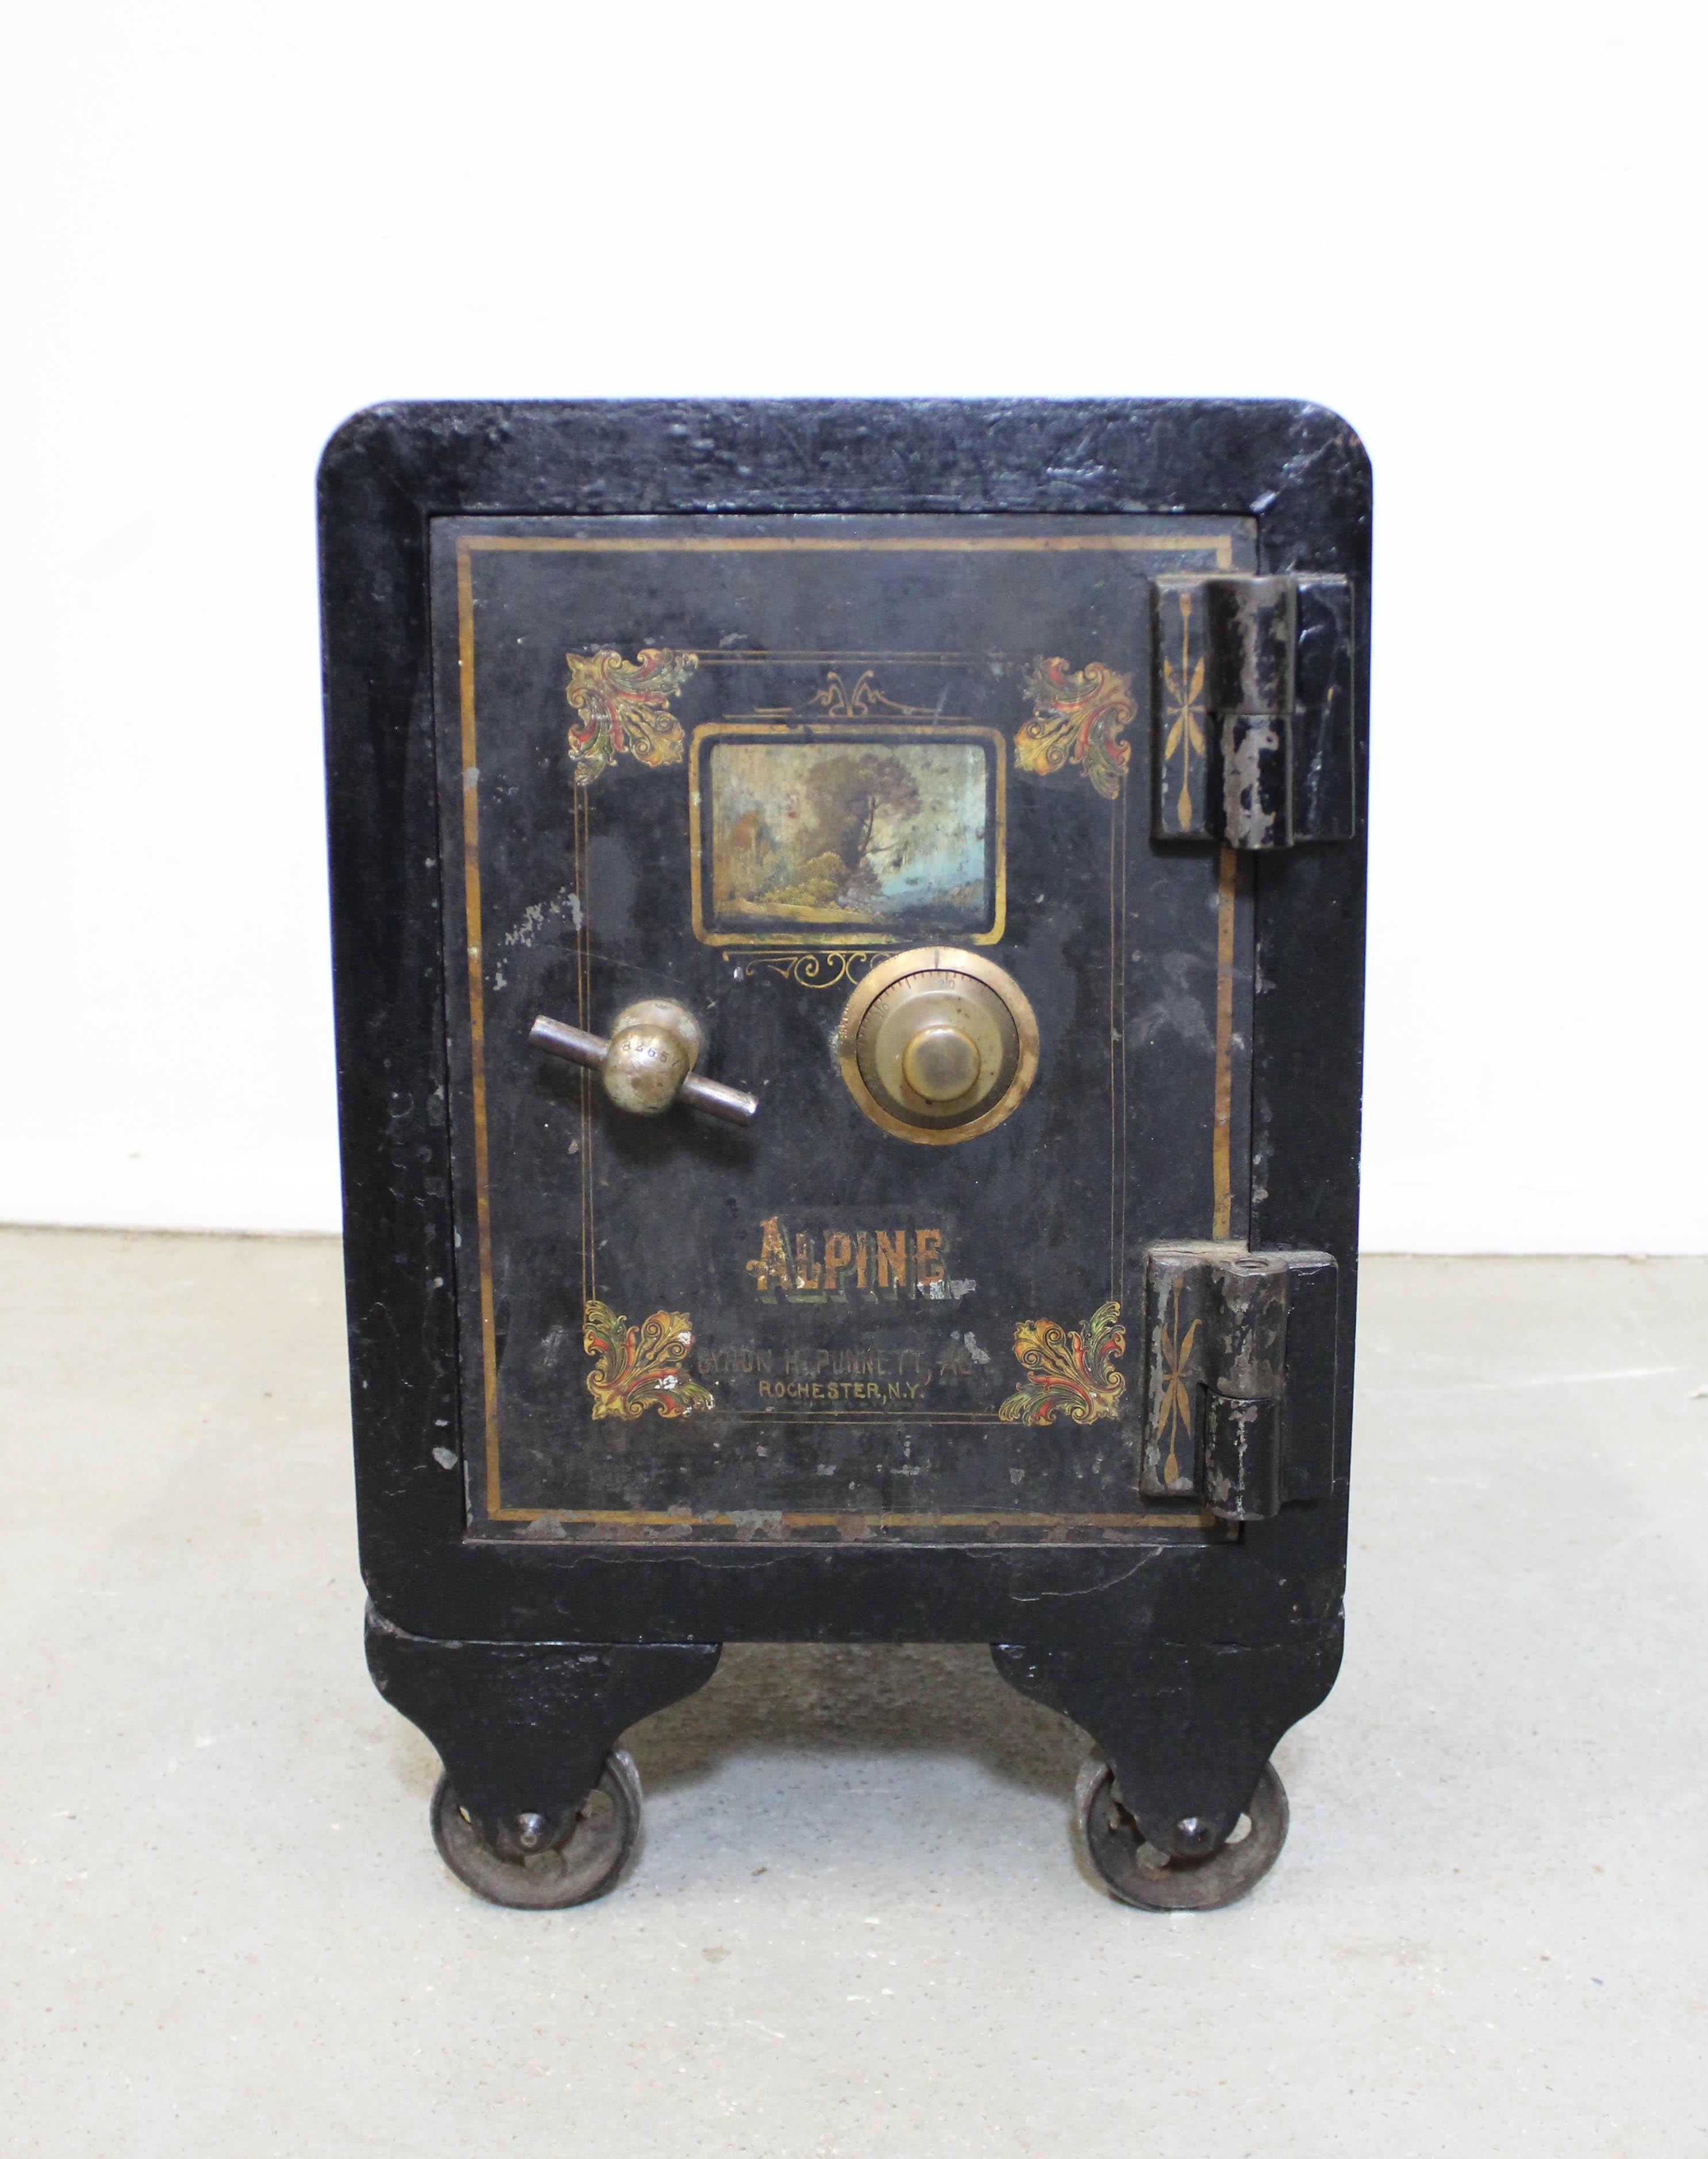 Offered is a small antique safe on wheels by Alpine. Made of cast iron, featuring original hand painted door. Inside features small compartments including one drawer and door with key. Combination is on the back. Functional and usable. Shows age